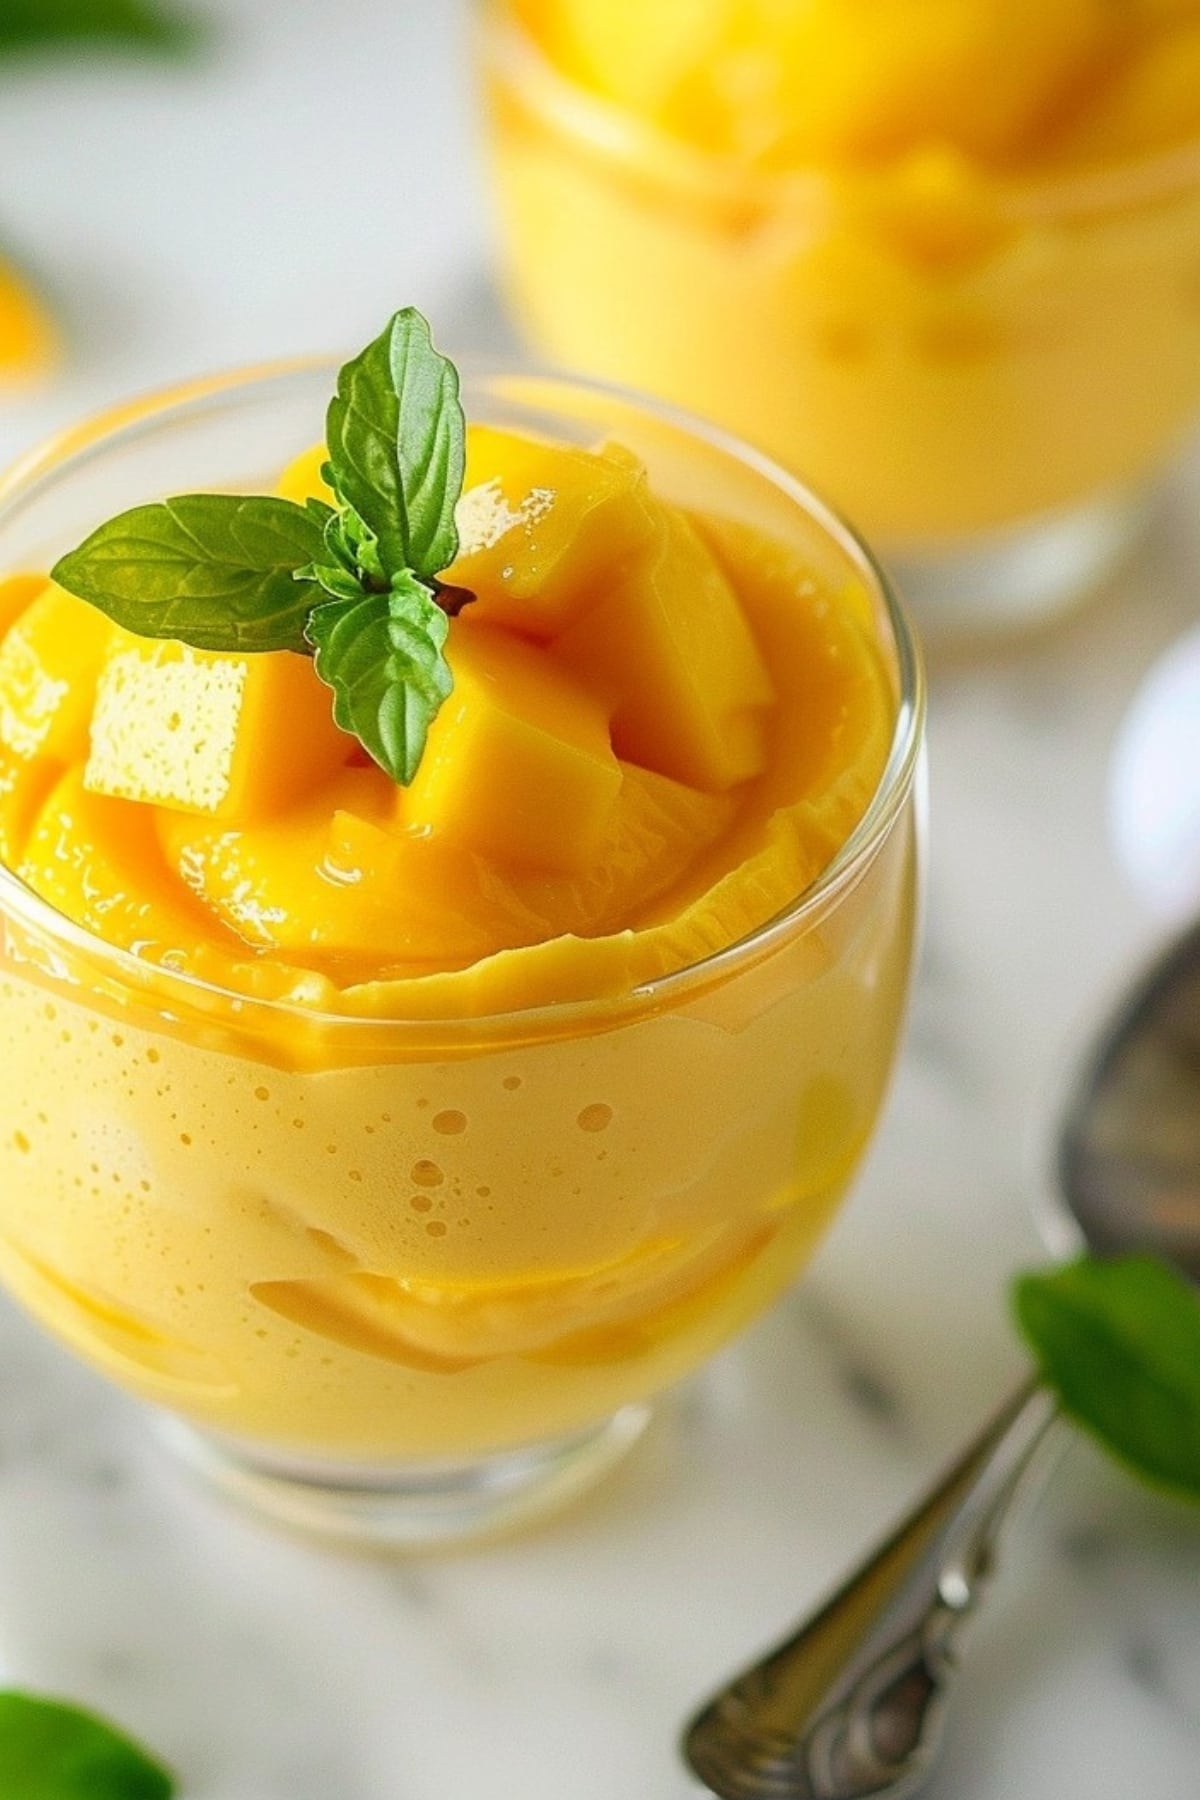 Creamy mango mousse in a glass garnished with sliced mangoes and mint leaves.